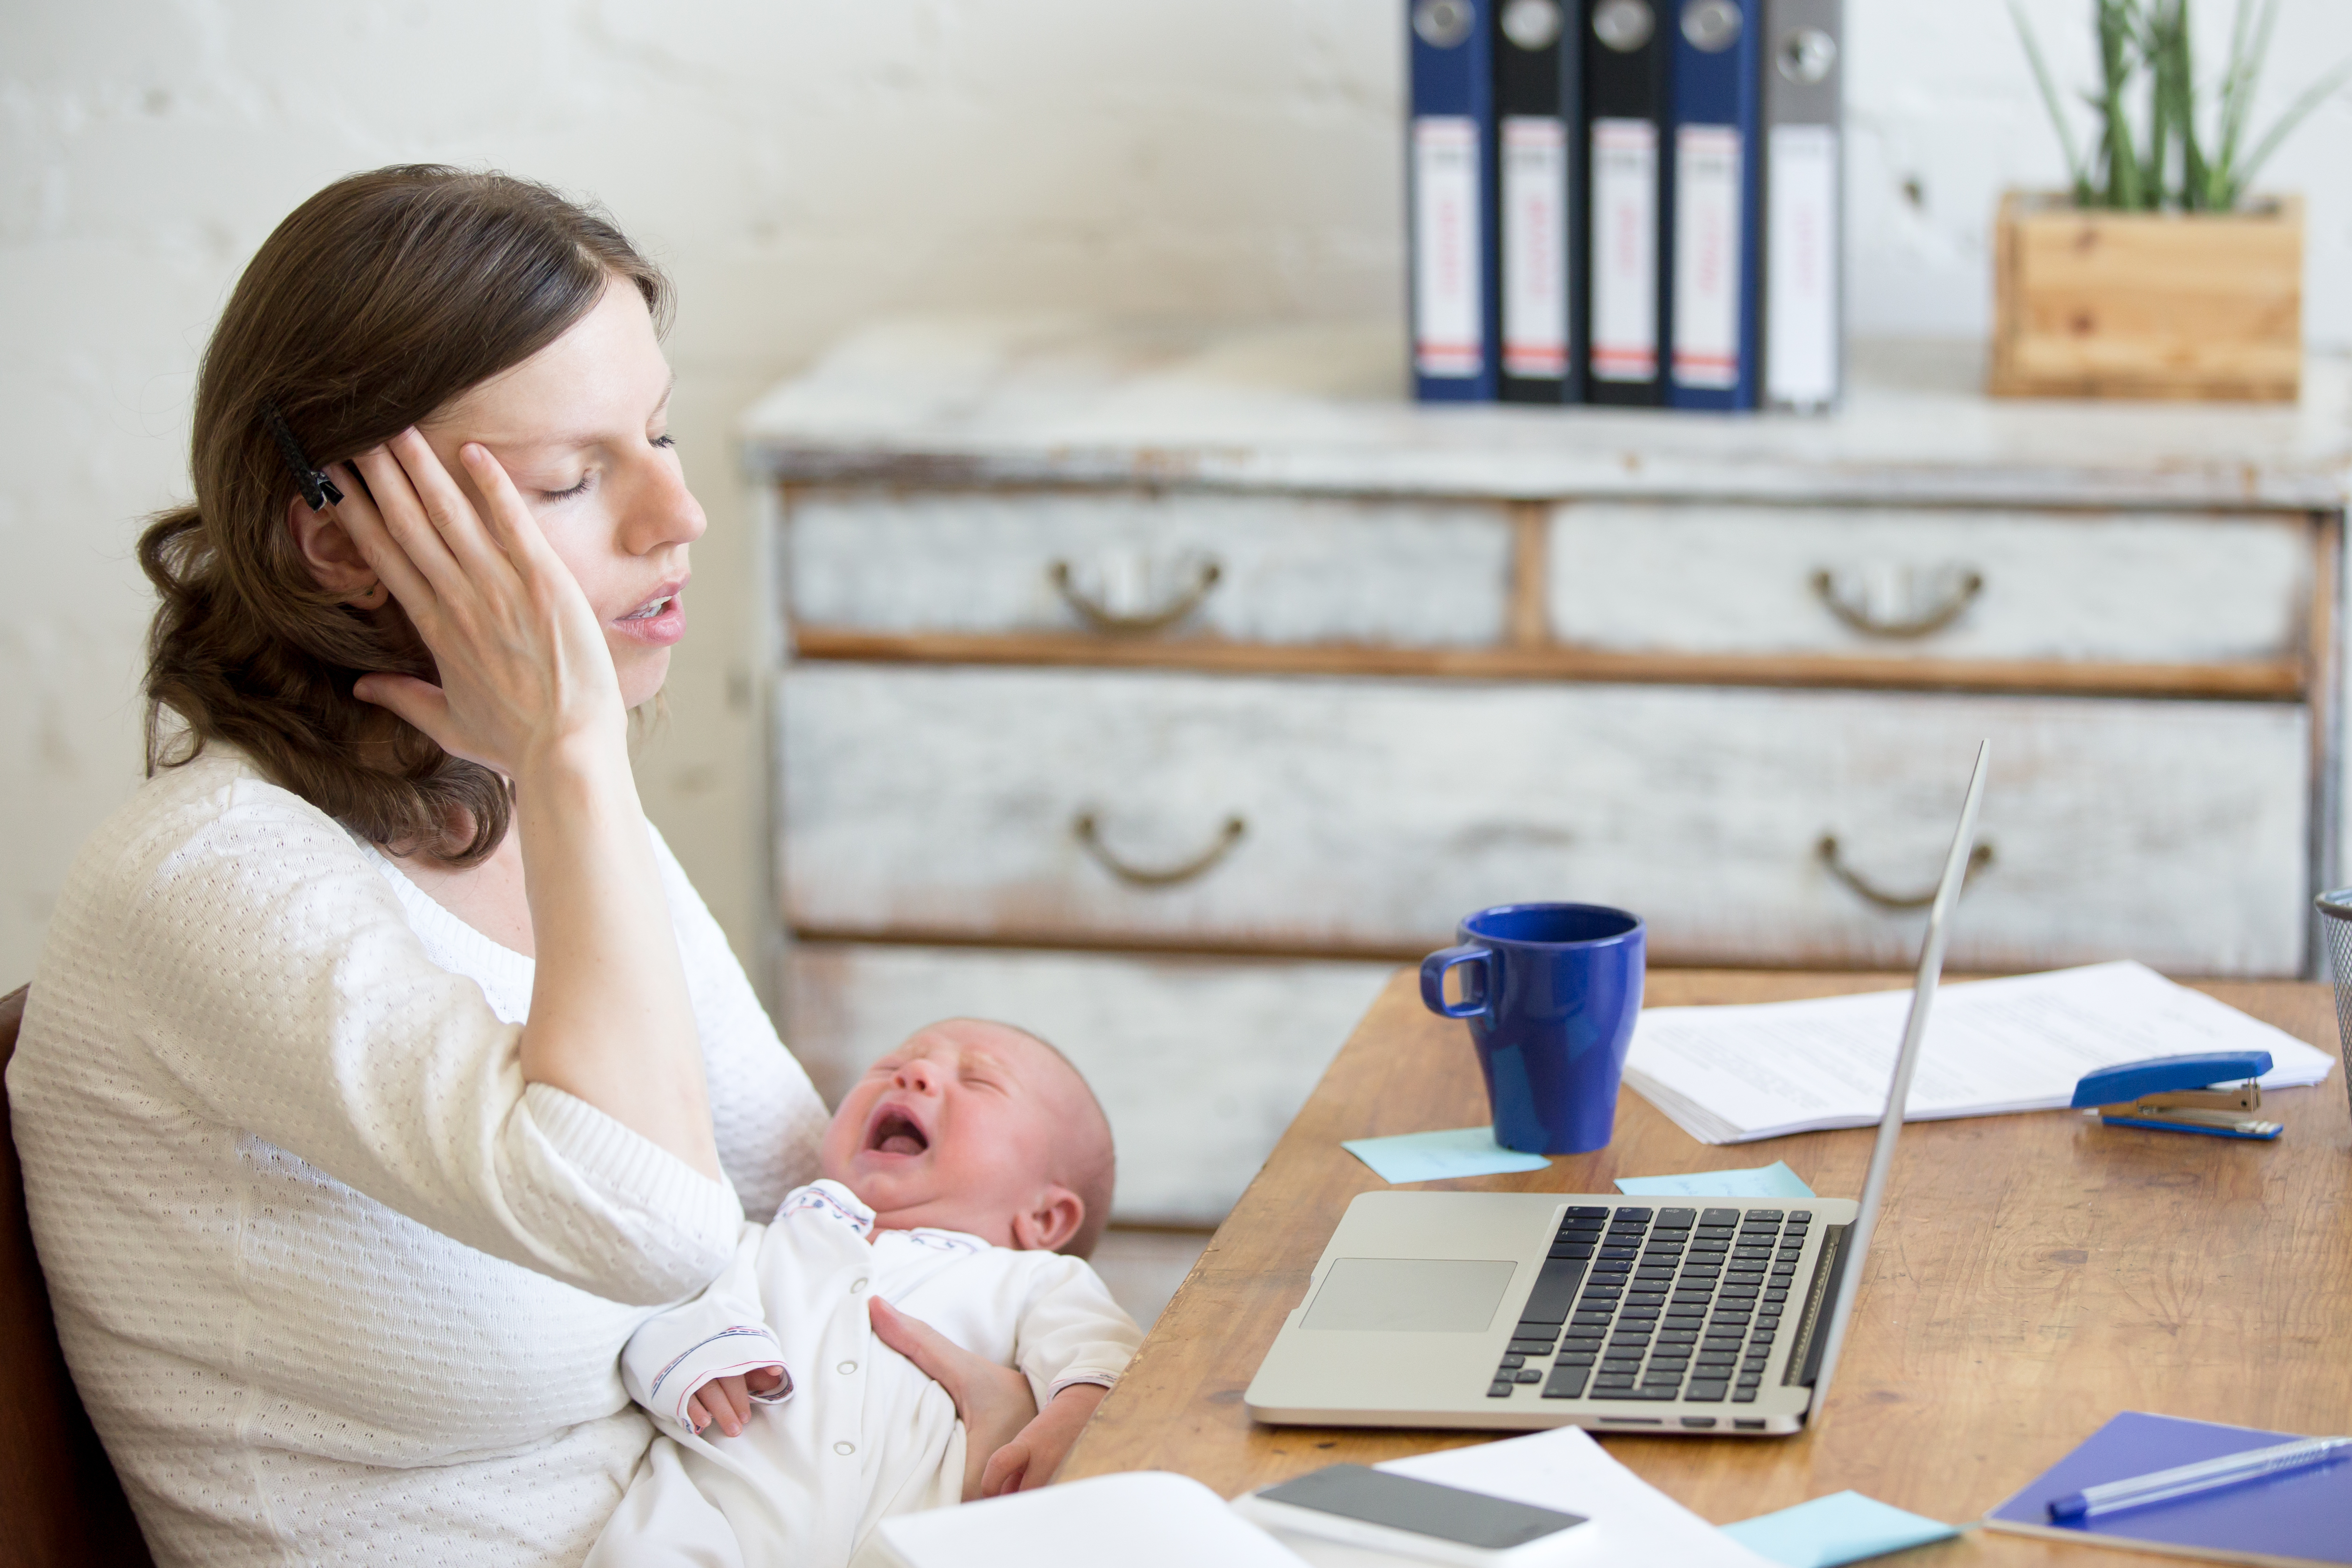 A mother looking stressed with her child | Source: Shutterstock